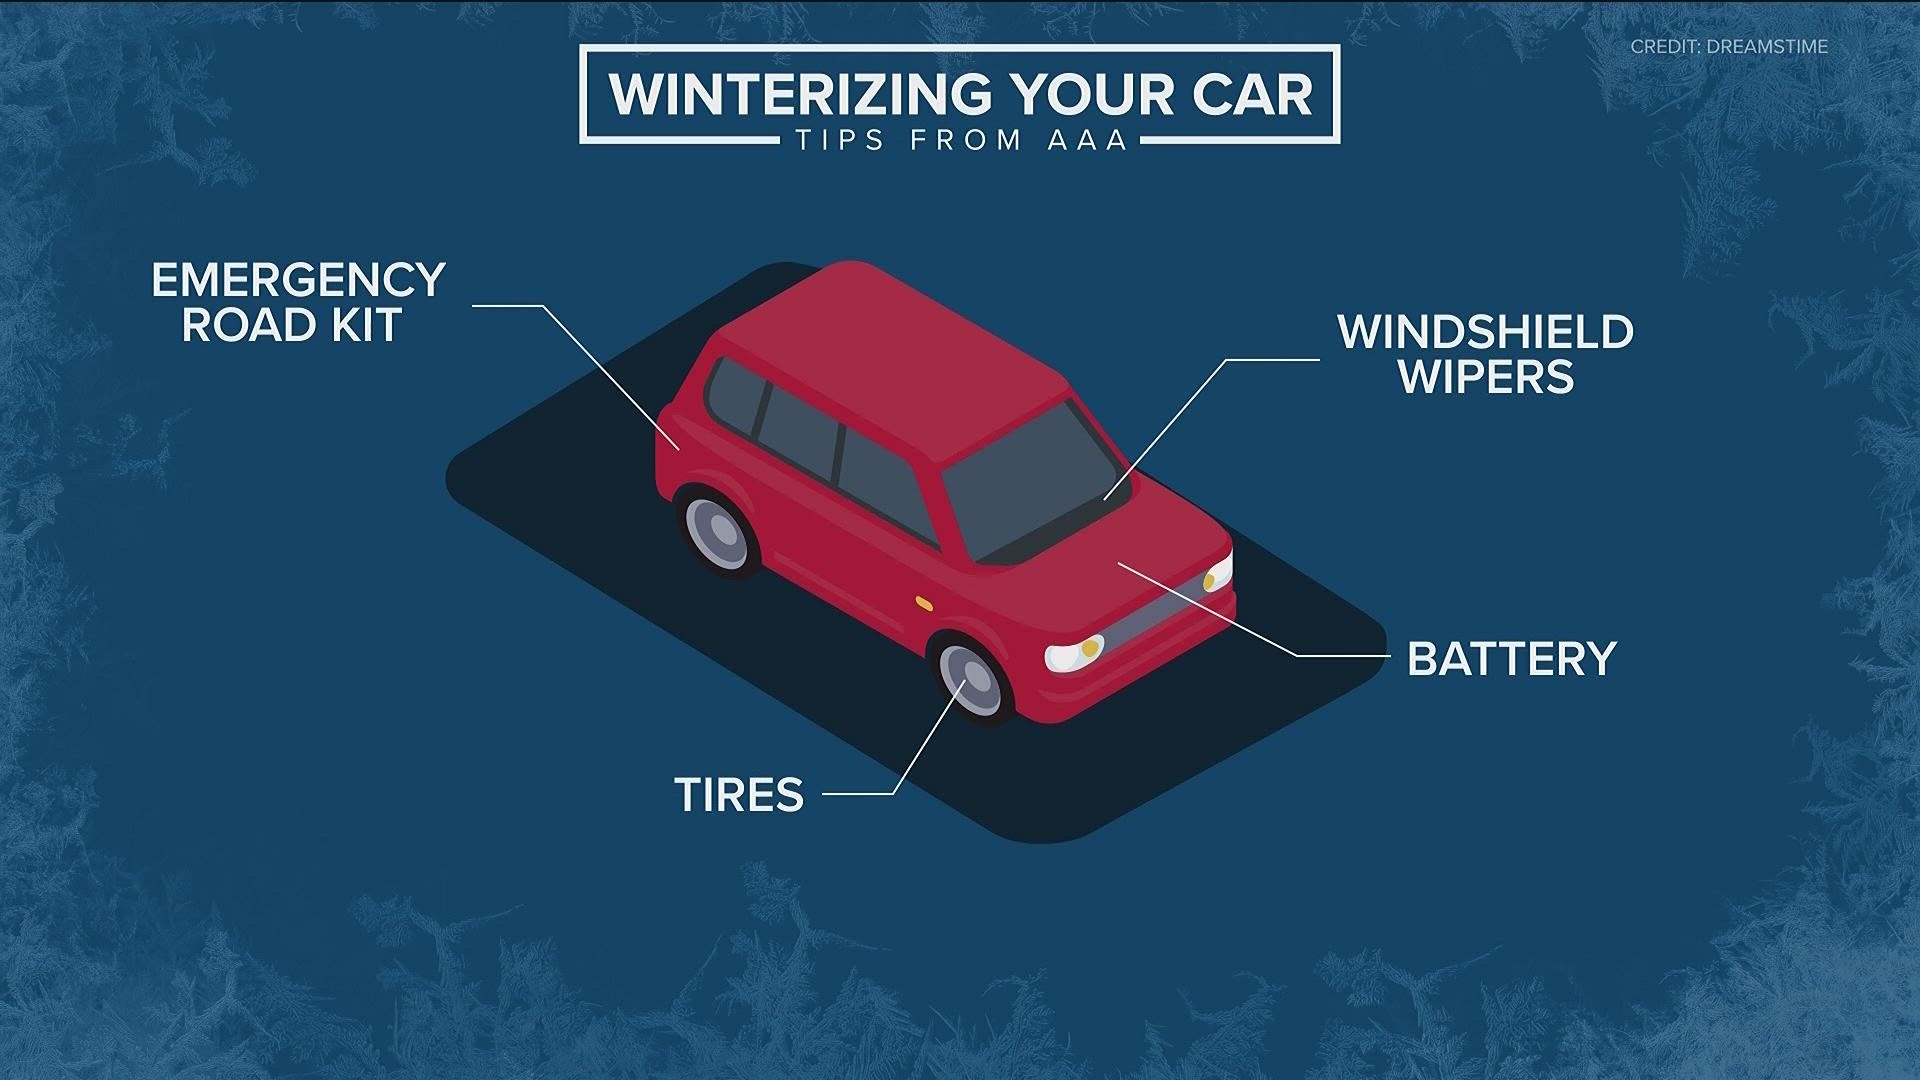 Check your car battery and make sure your tires have enough air.